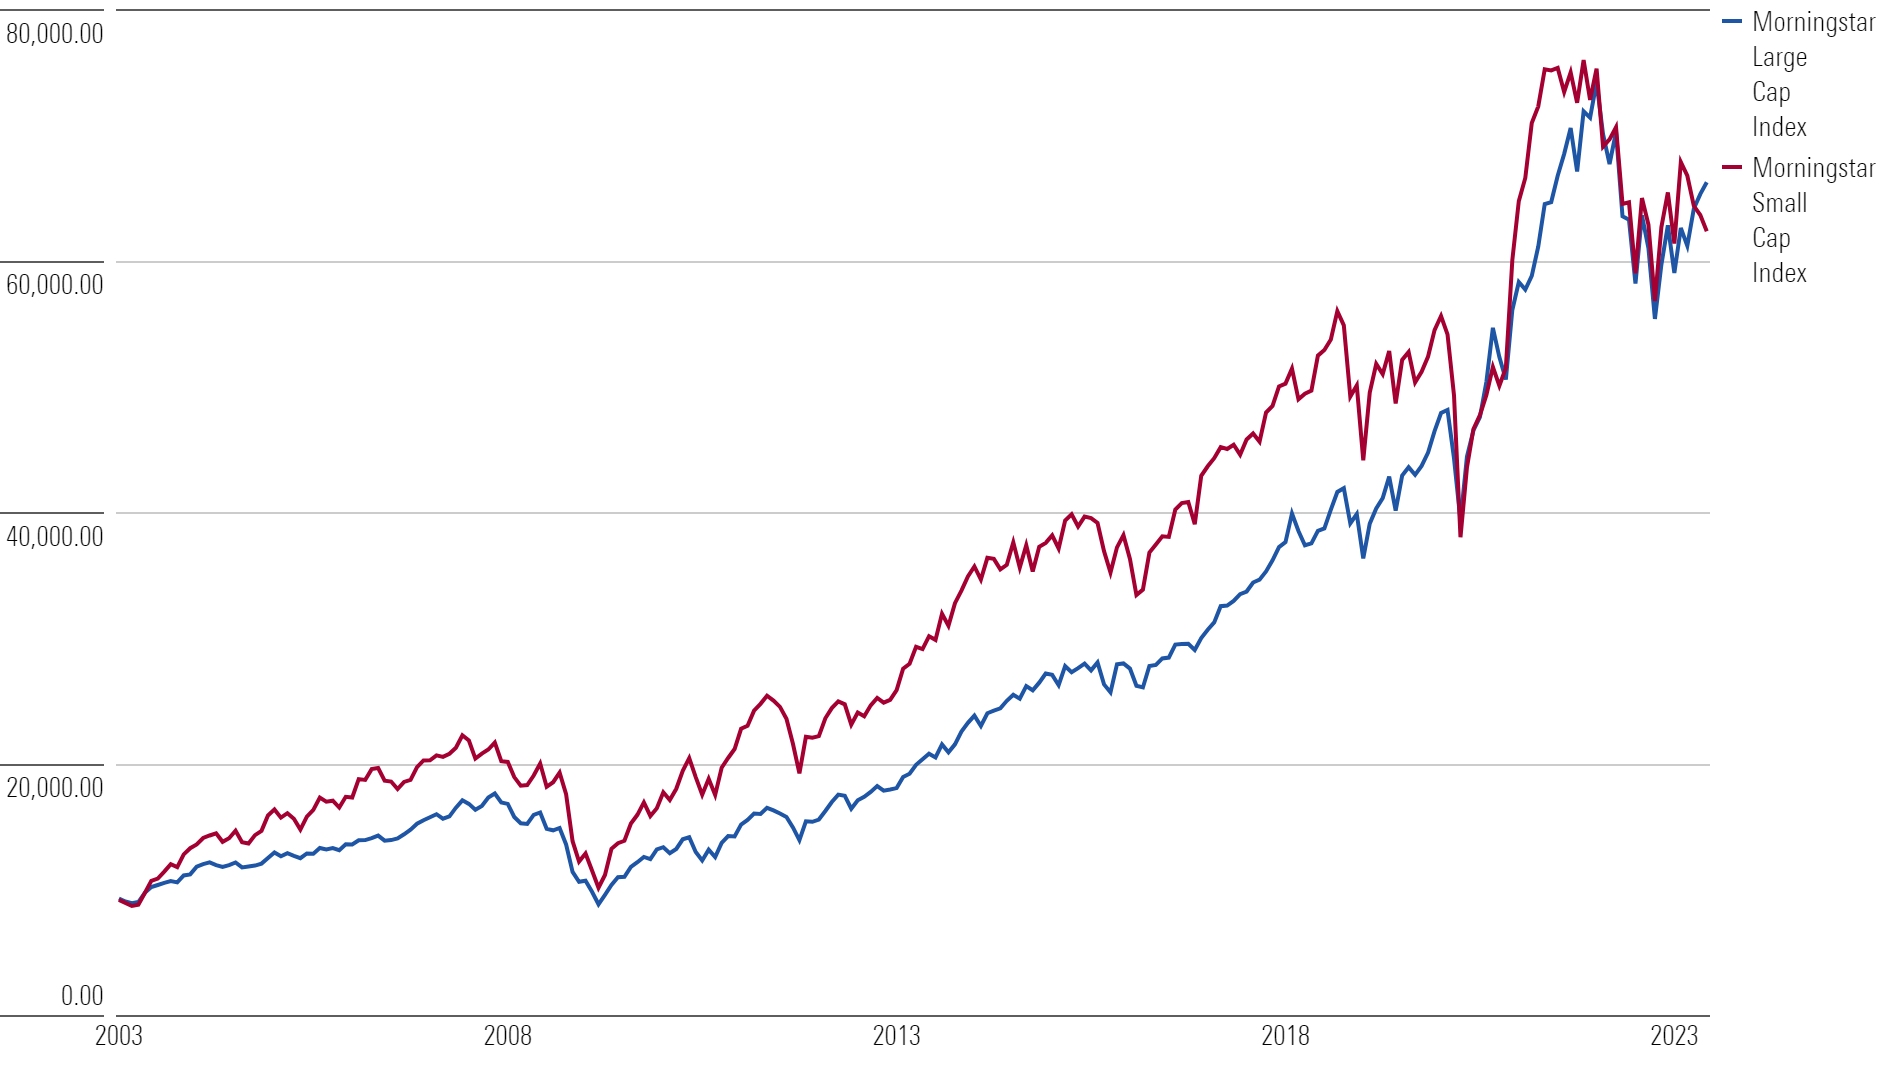 Large-cap stocks recently overtook small-cap stocks in total returns since 2002.